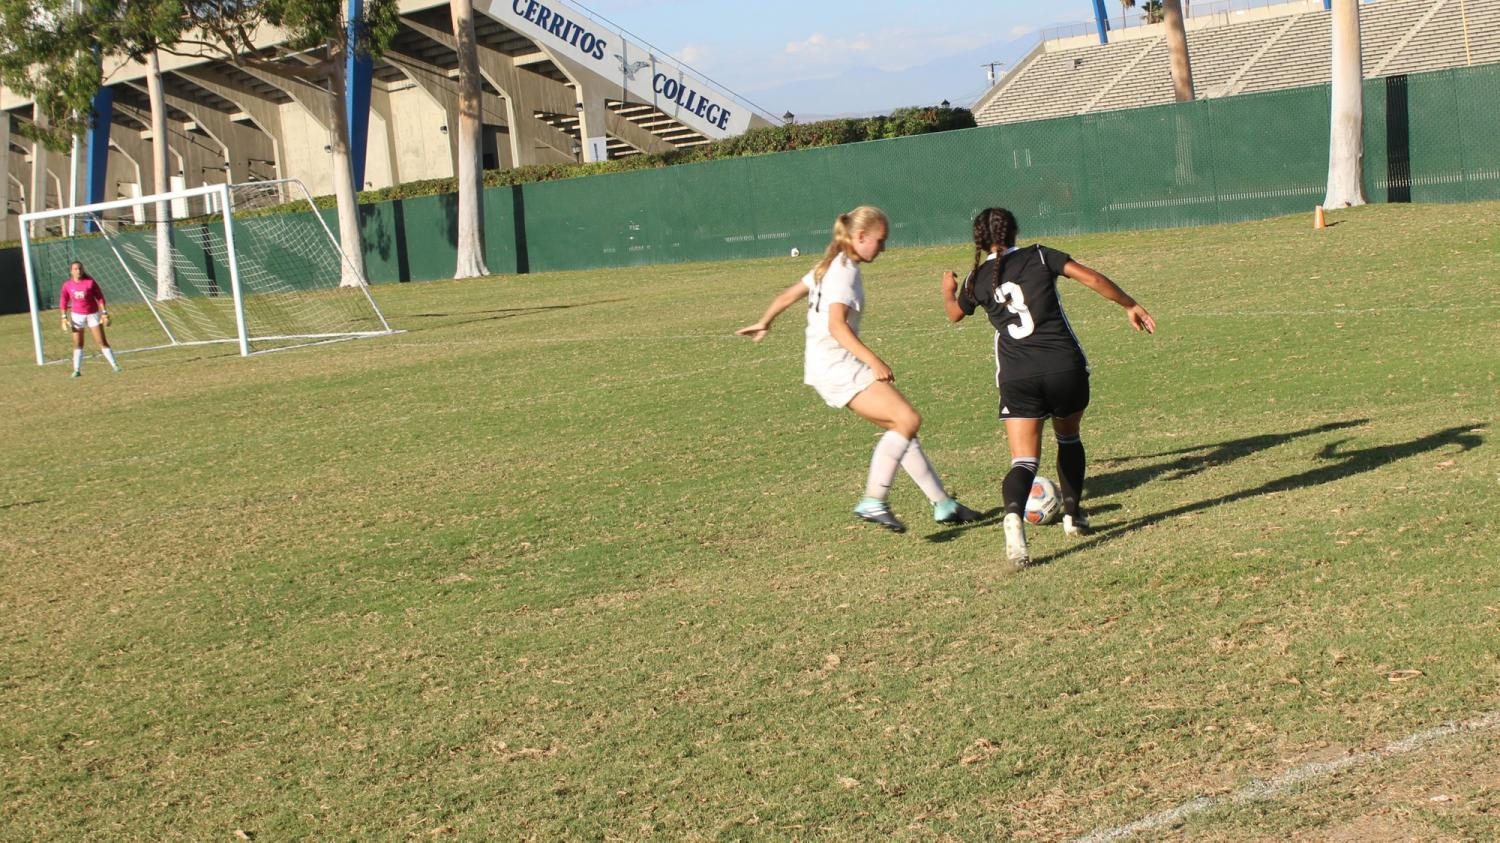 Falcon Mia Ramirez is kicking the ball towards the field. The game ended with Falcons winning 7-1. Photo credit: Nicholas Johnson